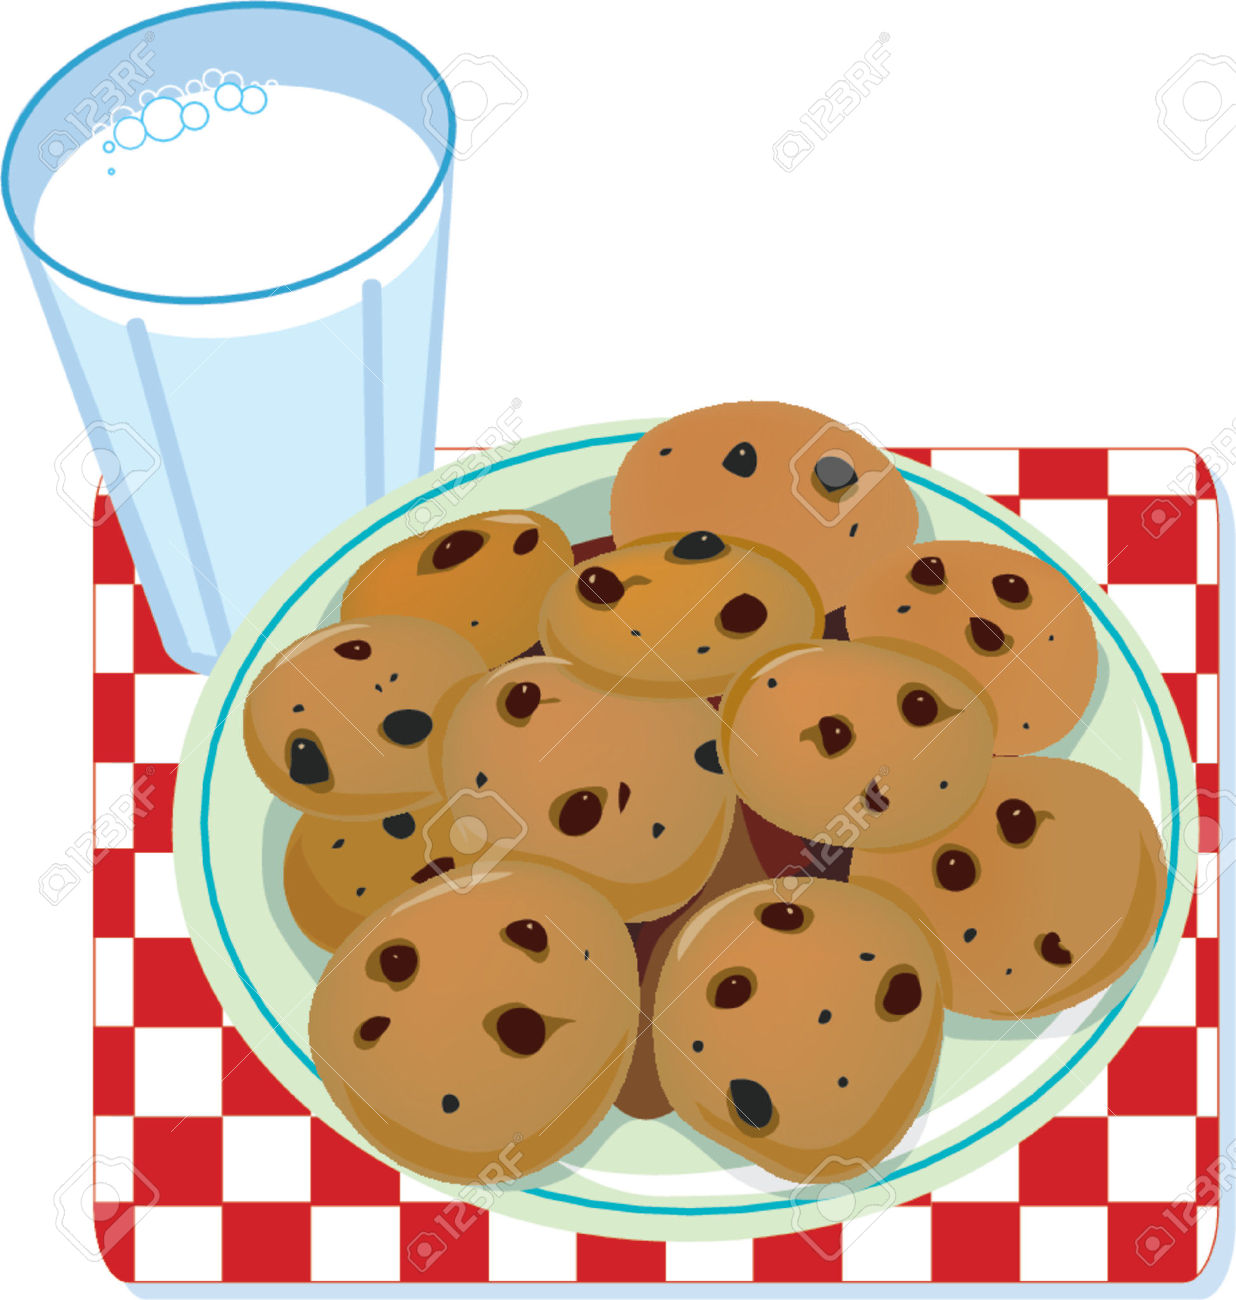 Cookies on a plate aganist a 